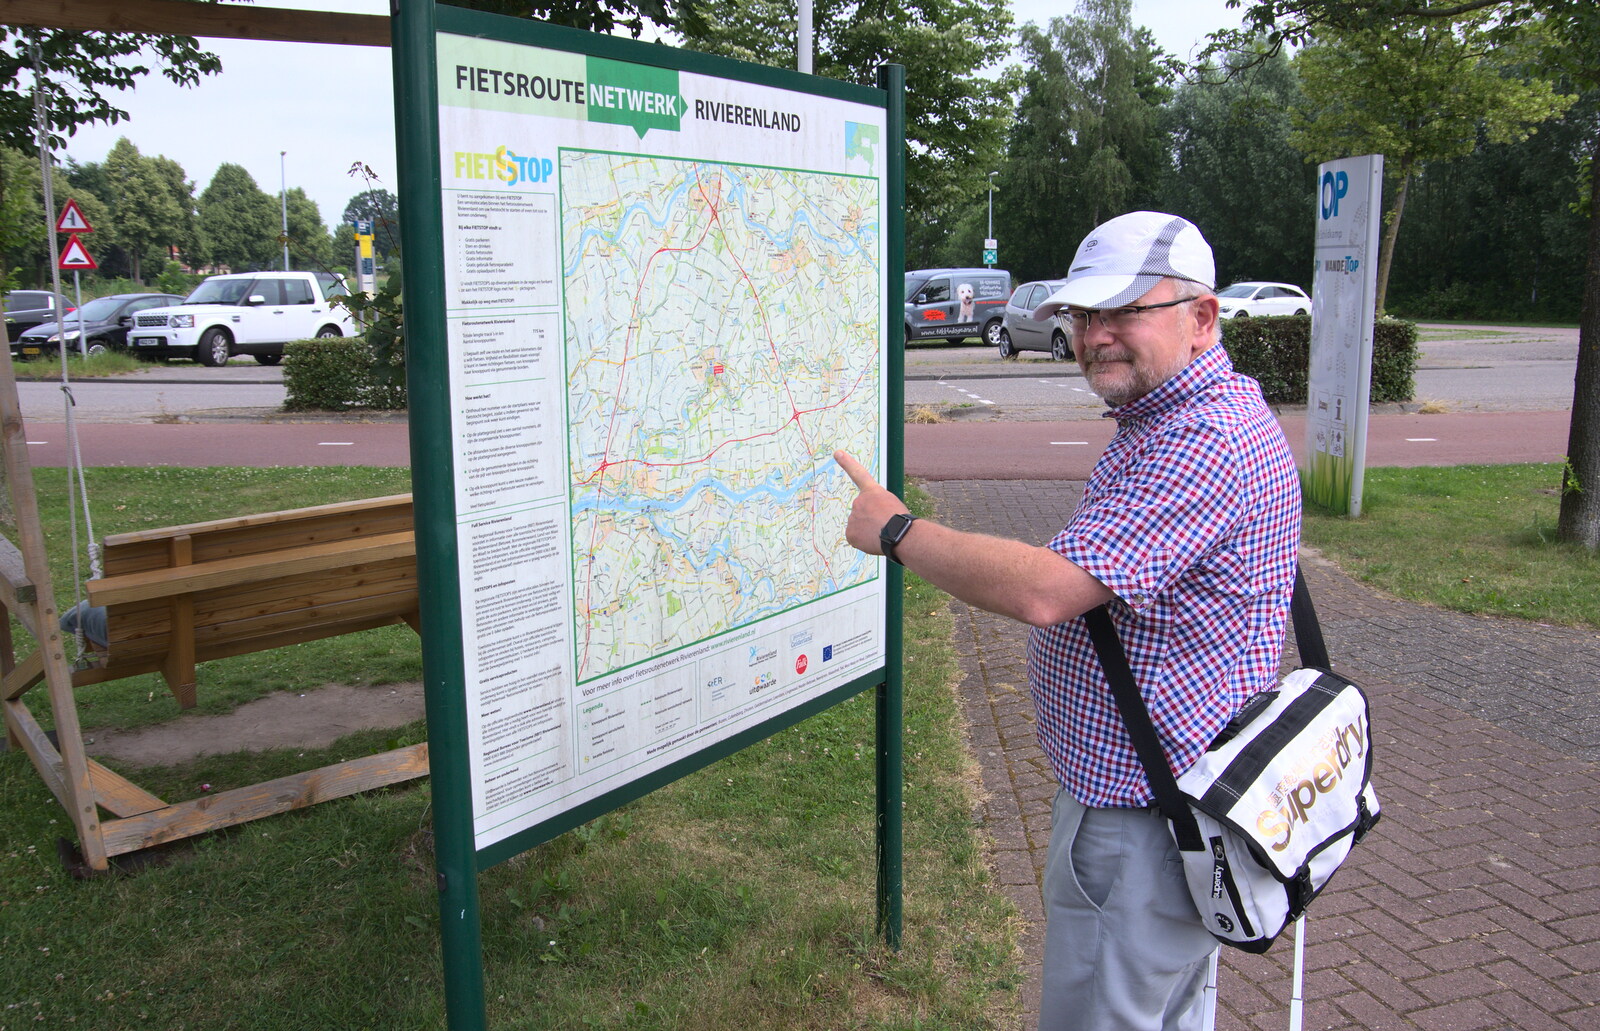 Hamish points to a cycle route sign from Martin's James Bond 50th Birthday, Asperen, Gelderland, Netherlands - 9th June 2018